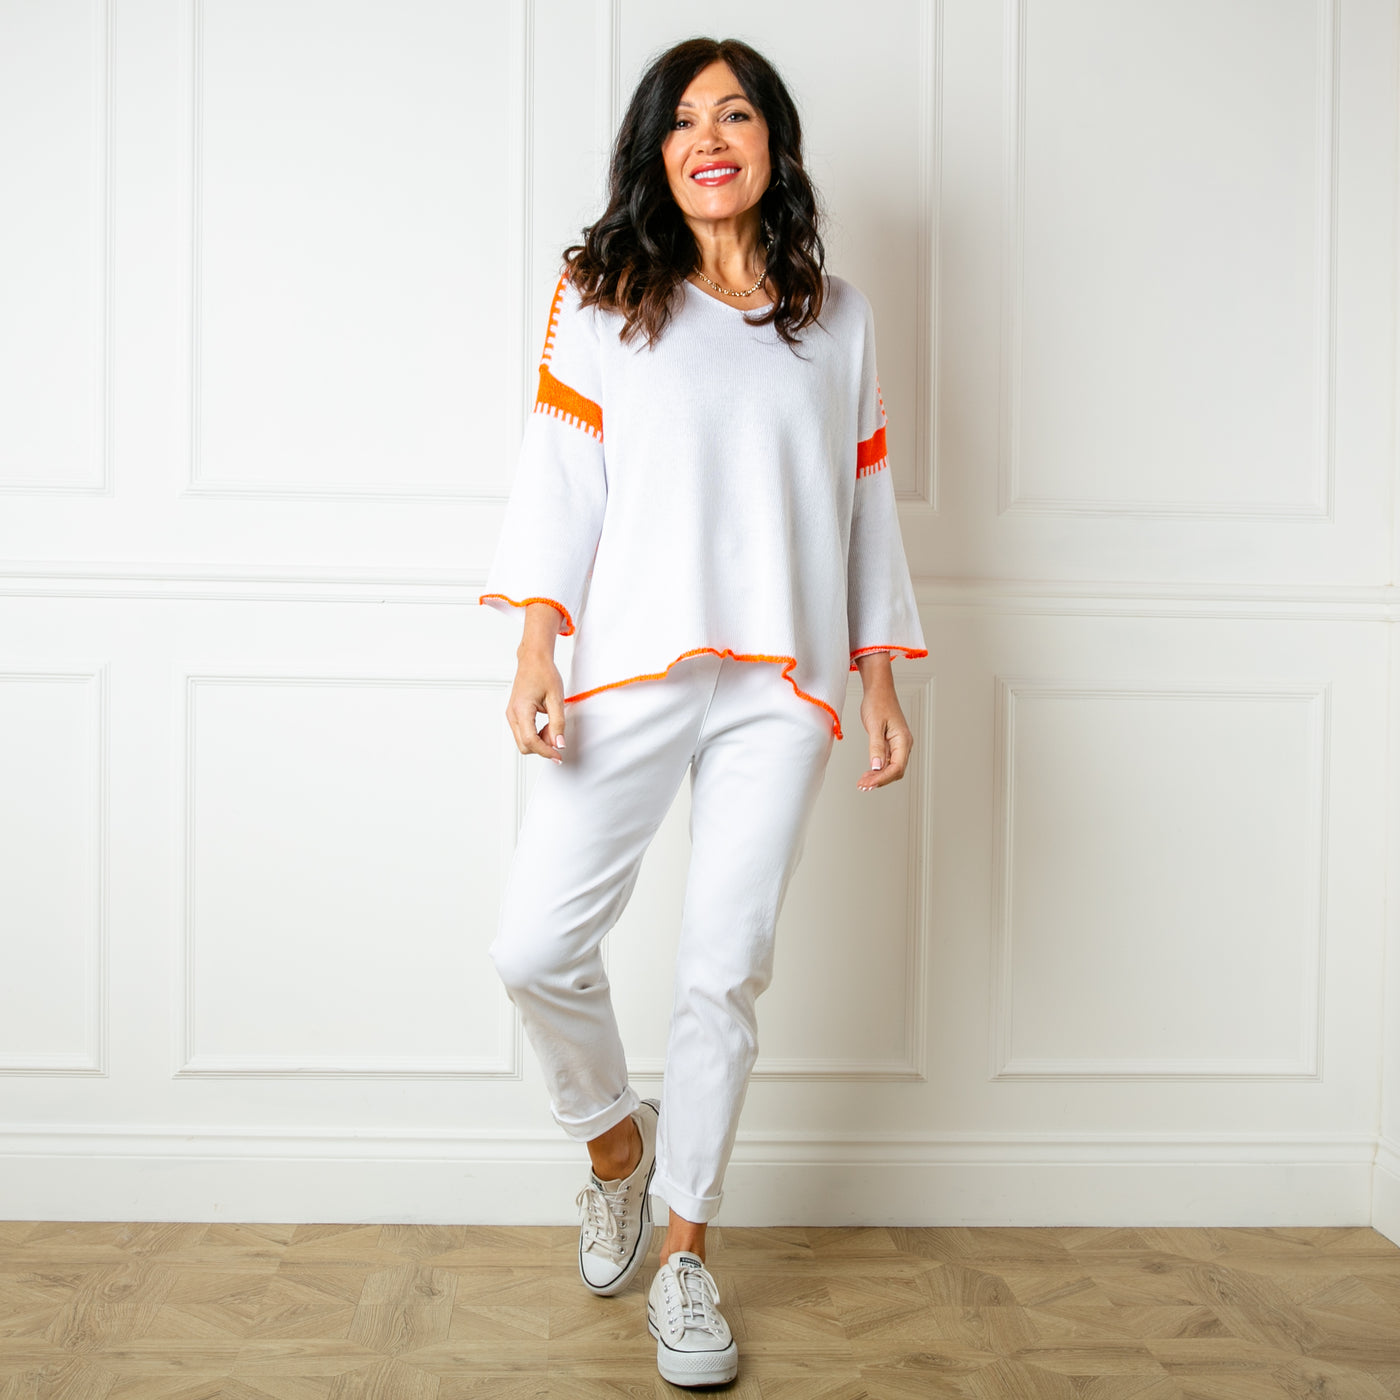 The white Block Stitch Jumper with long flared sleeves and a v neckline